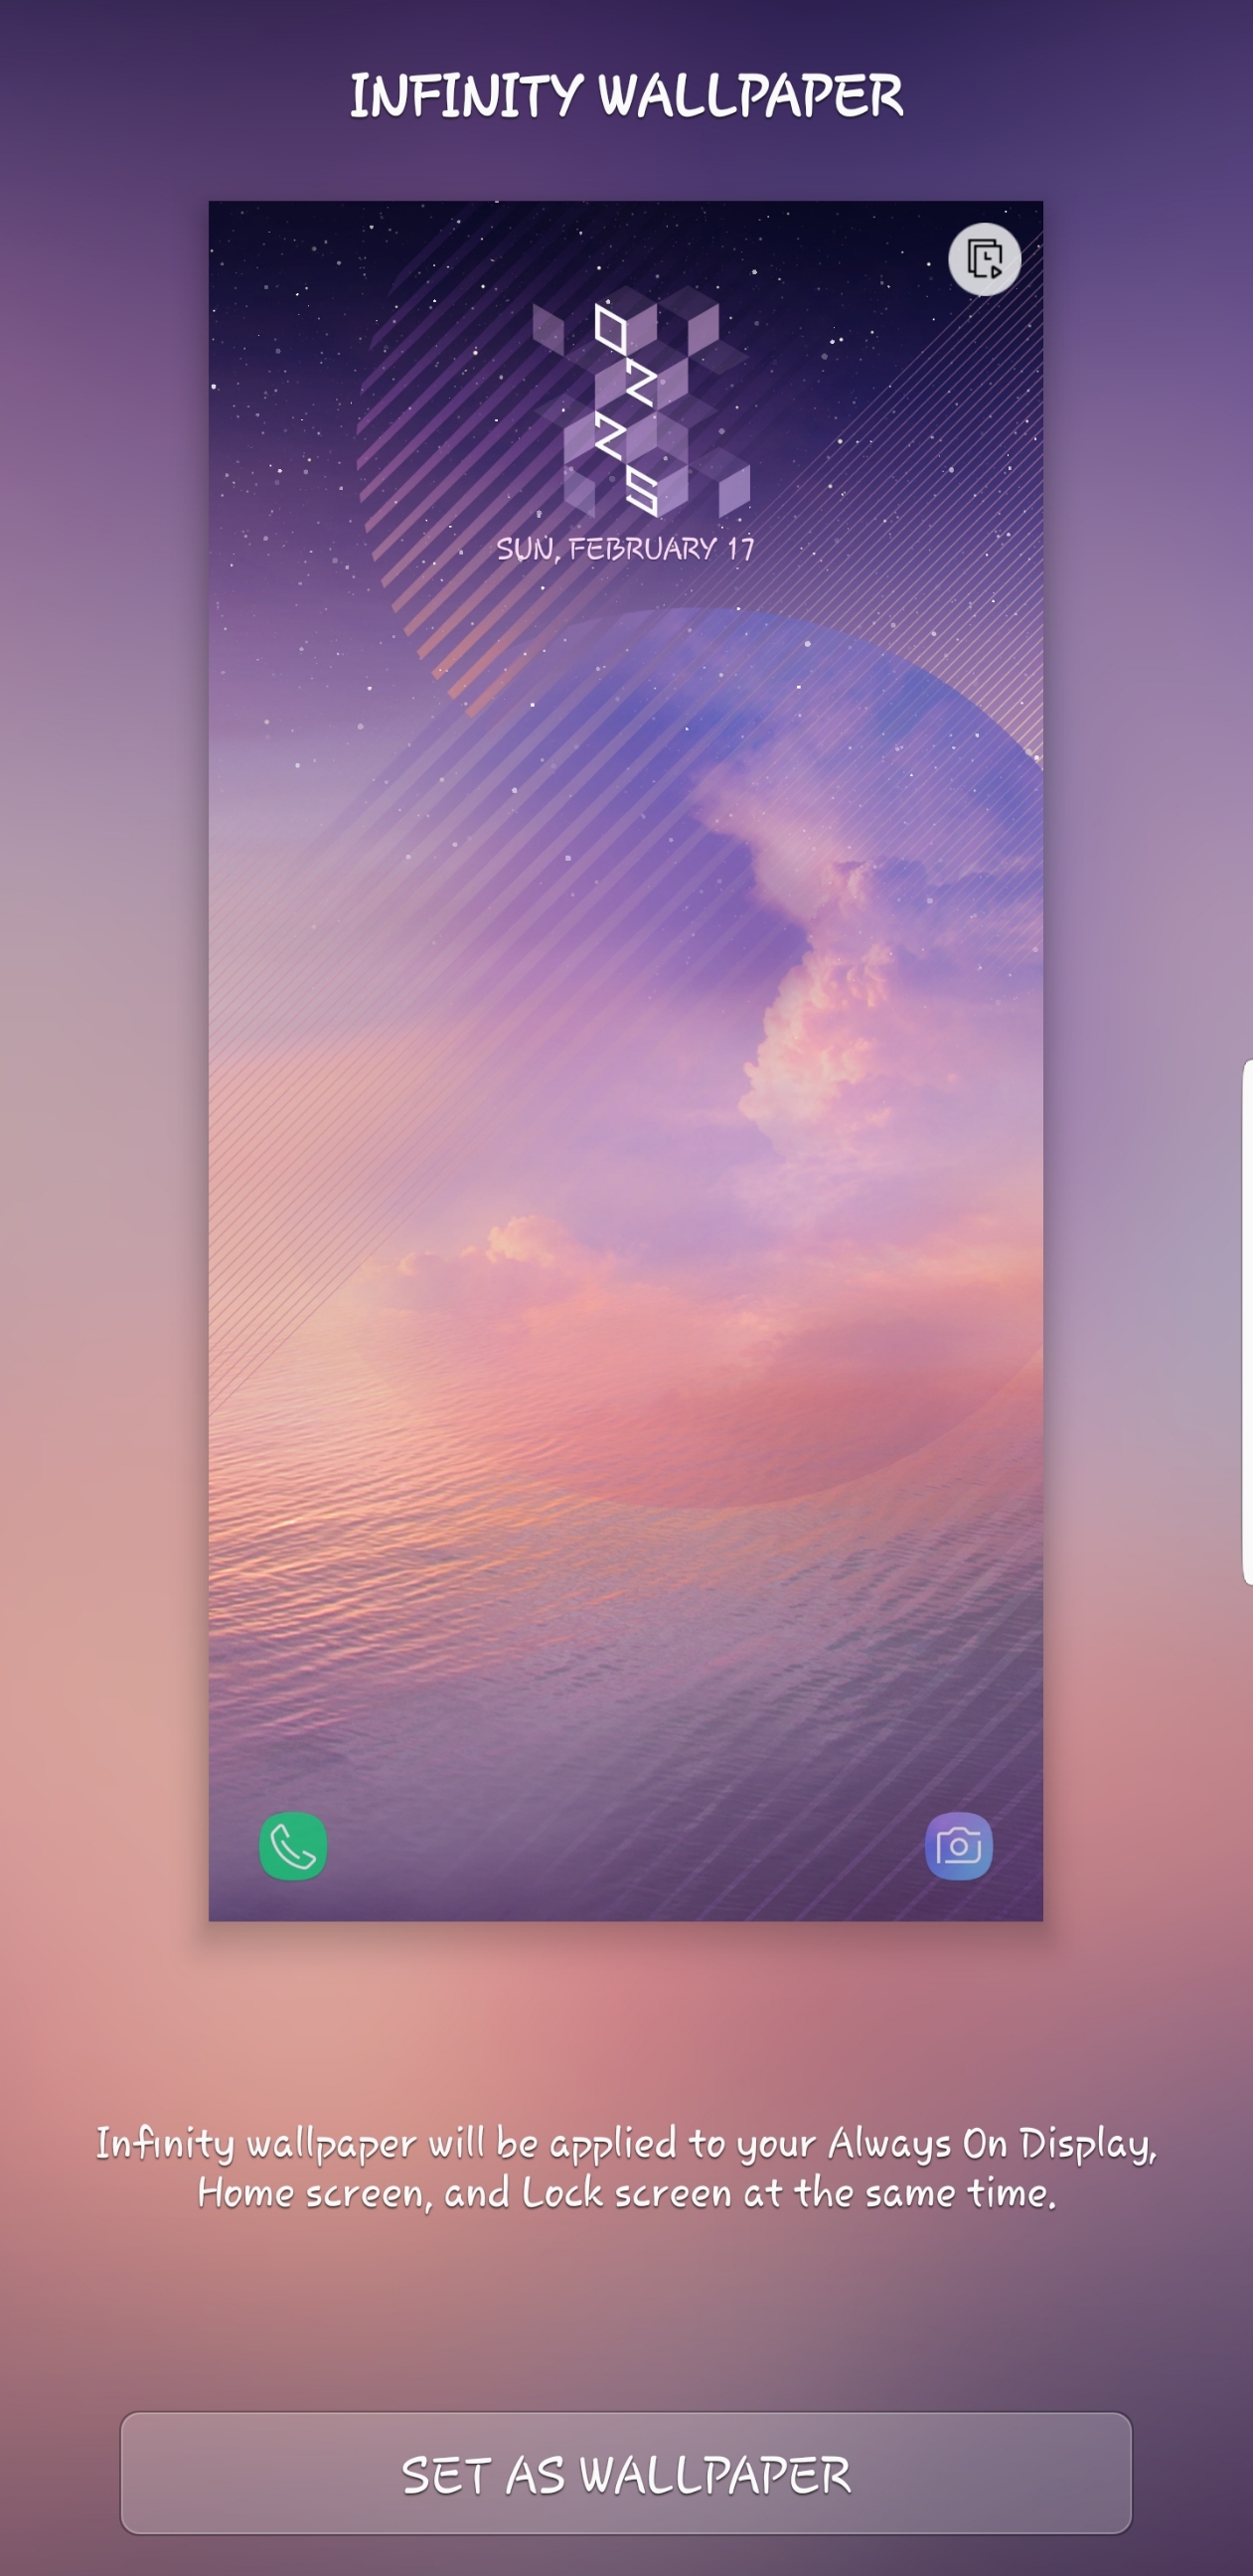 Anybody Know If I Can Get The Note8 Infinity Wallpaper On